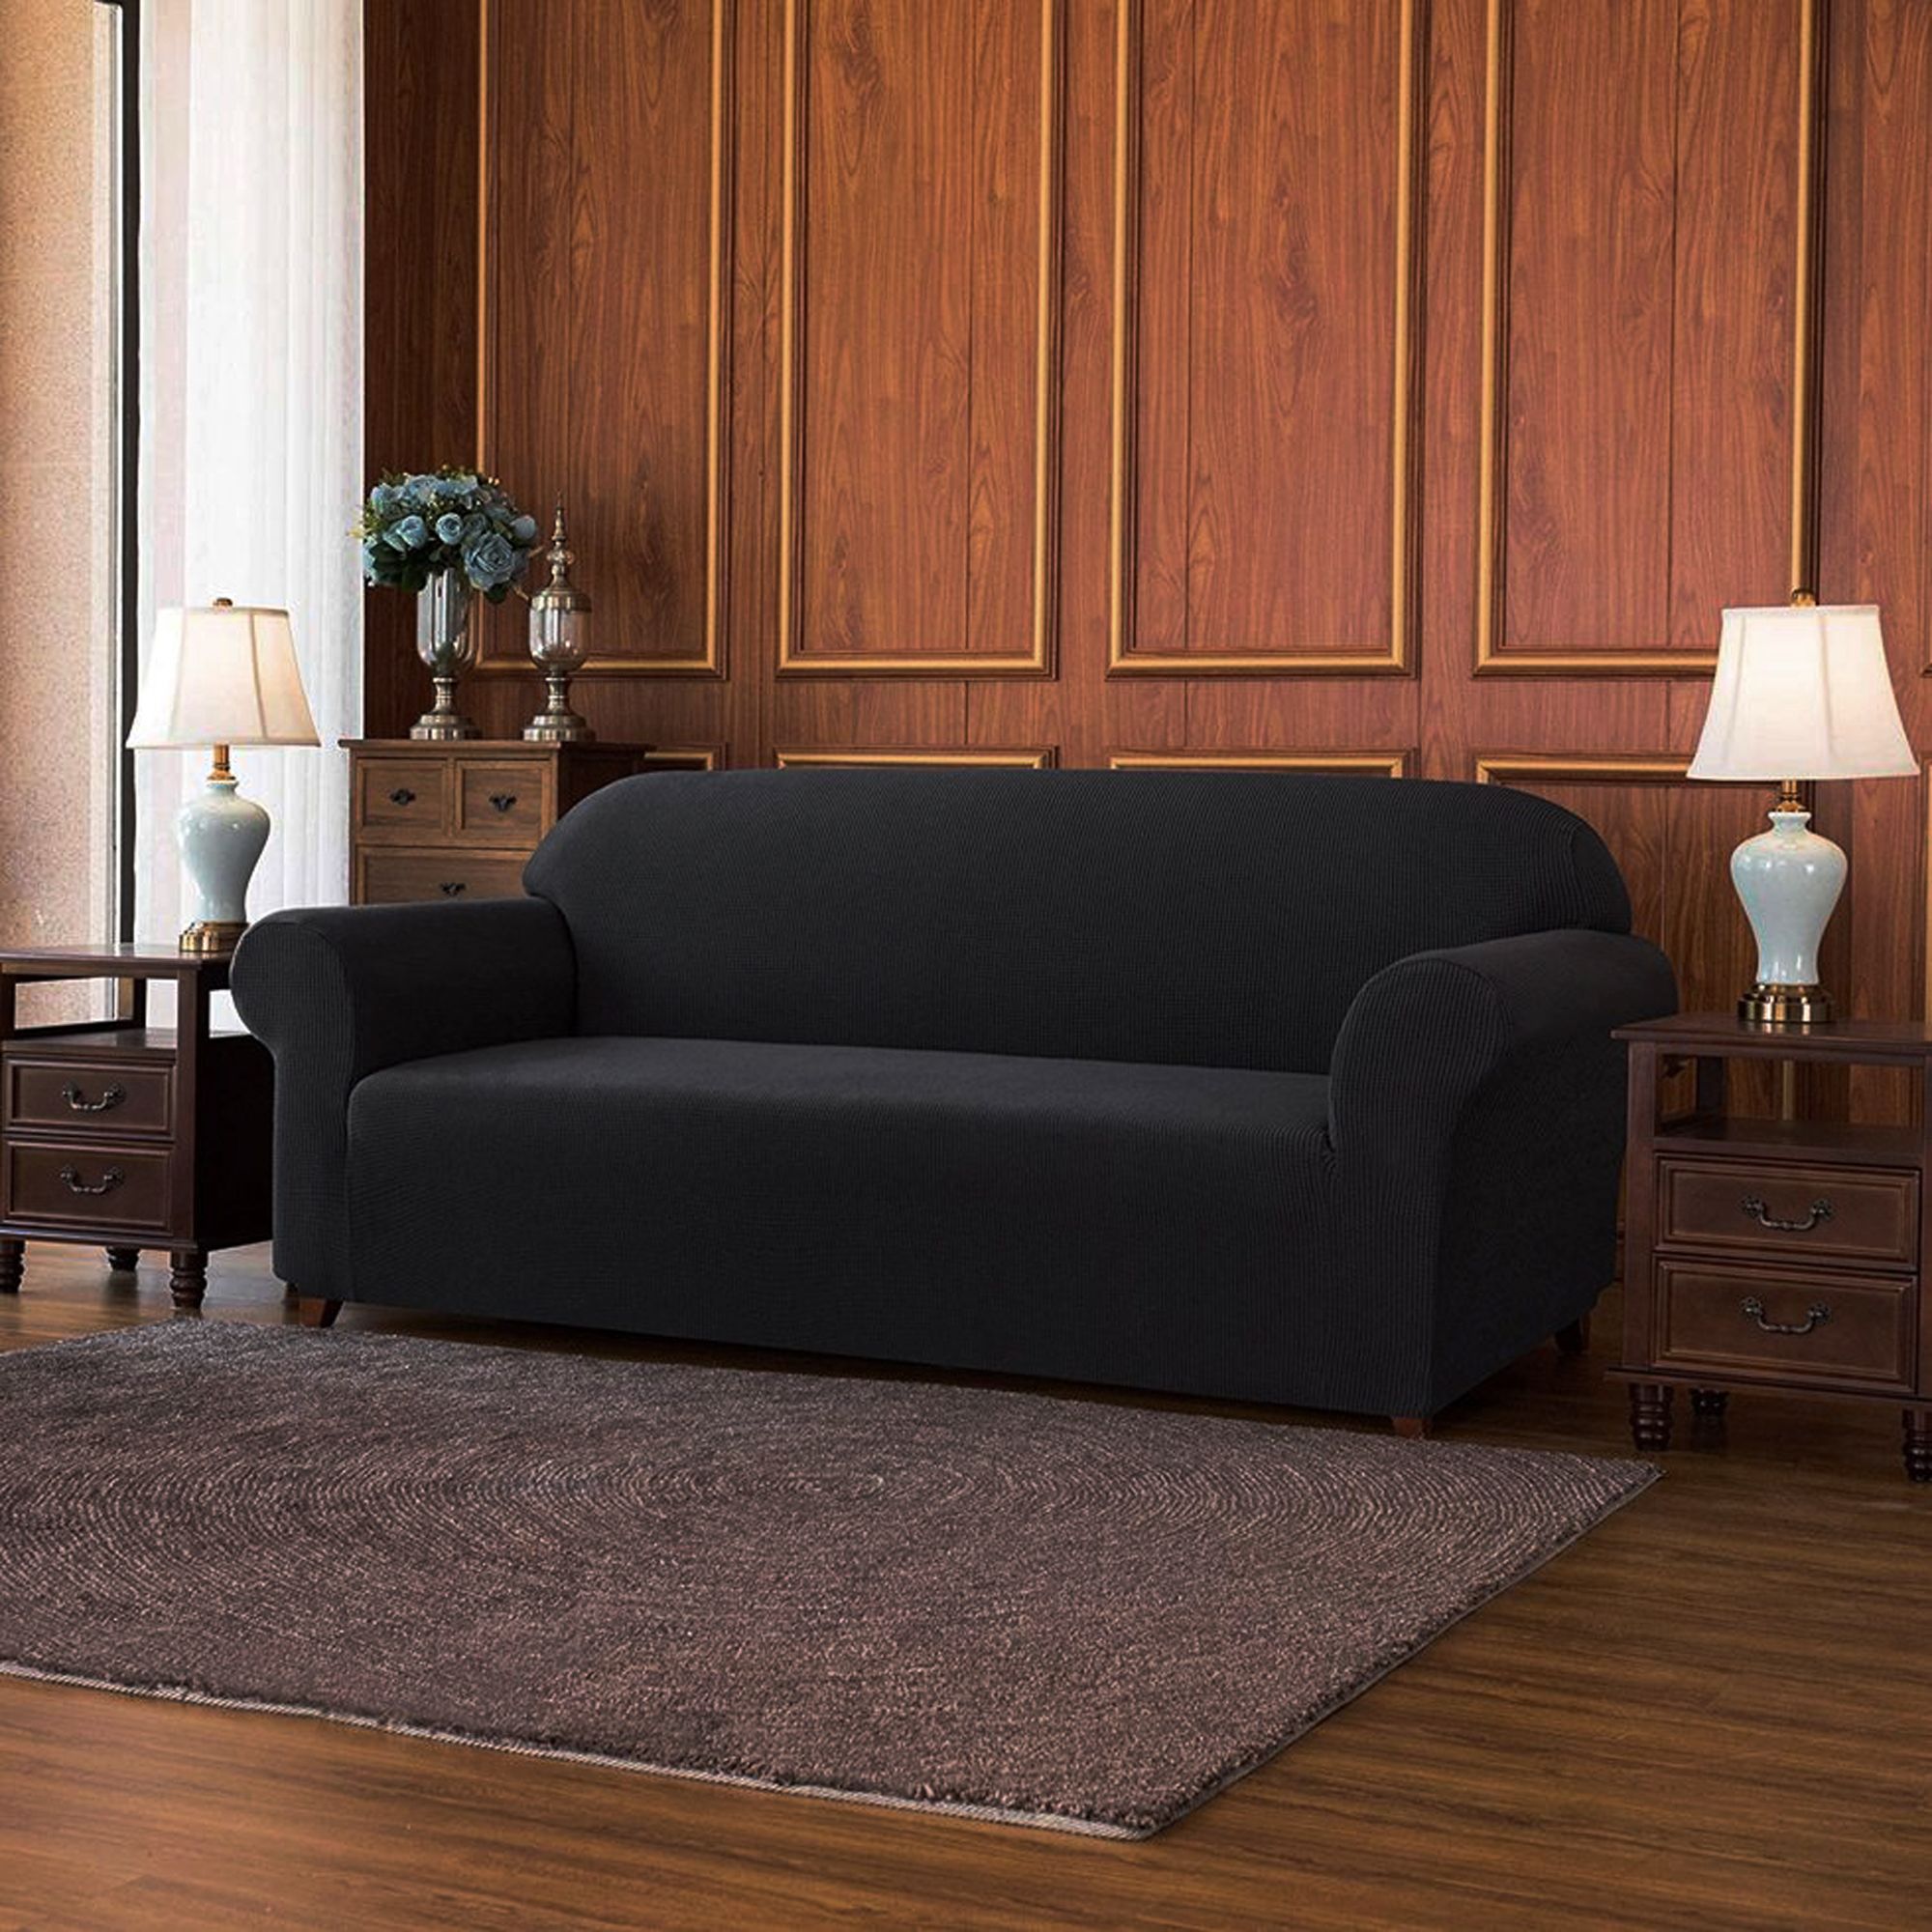 Ultimate Stretch Leather Four Piece Sofa Slipcover | Form-Fitting |  Individual Cushion Covers | Machine Washable